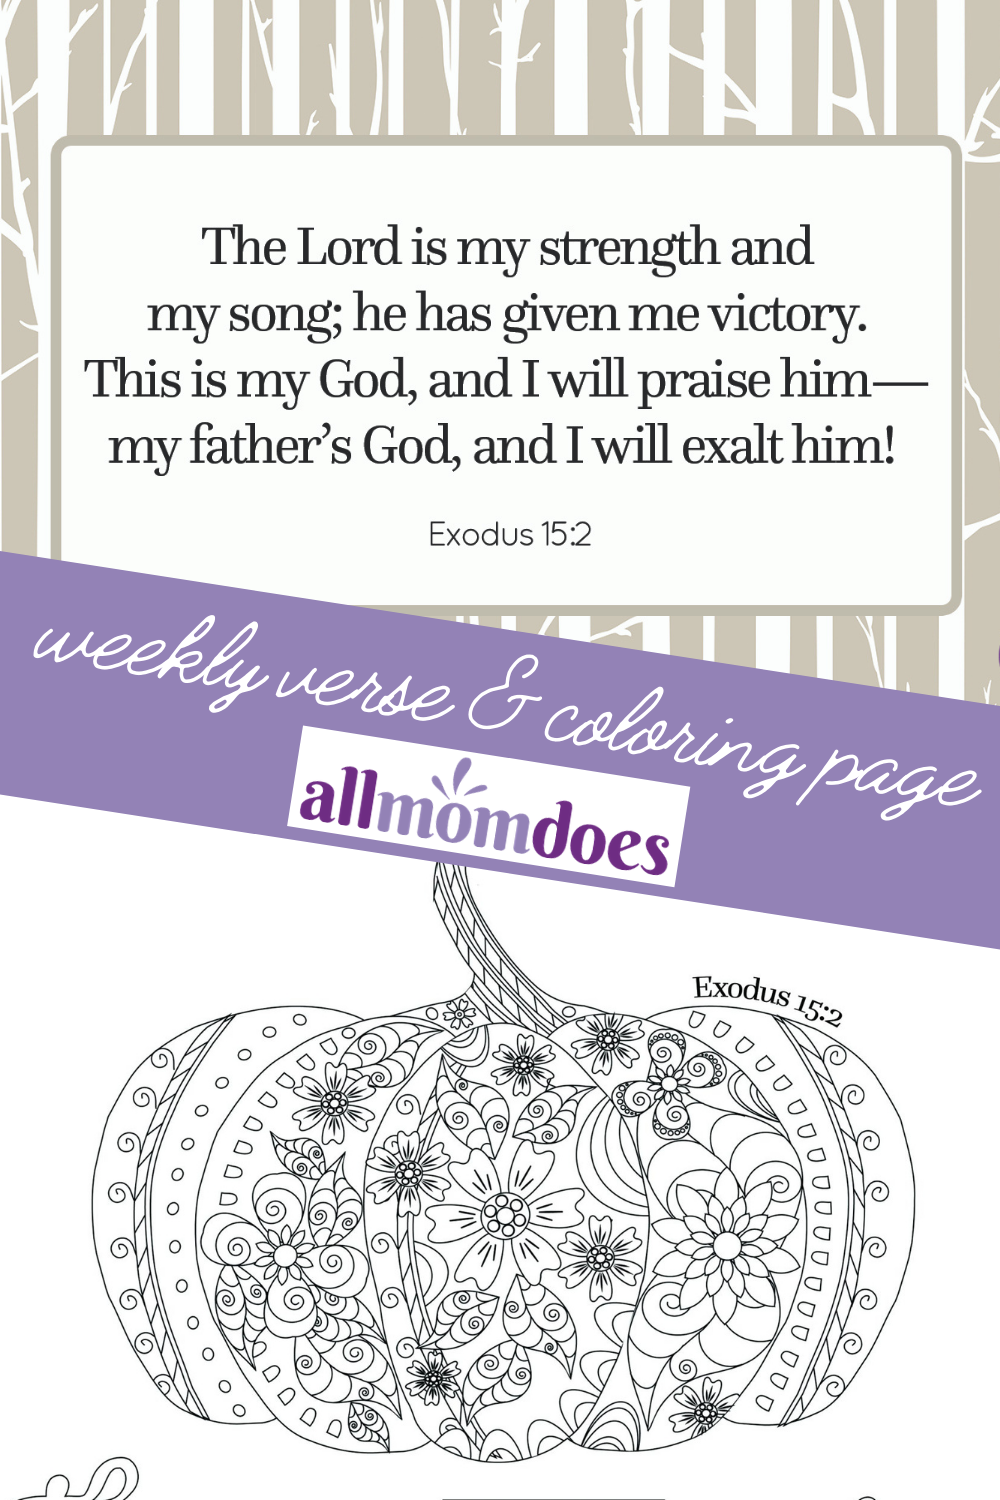 Download Weekly Bible Memory Verse + Coloring Page: Exodus 15-2 ...